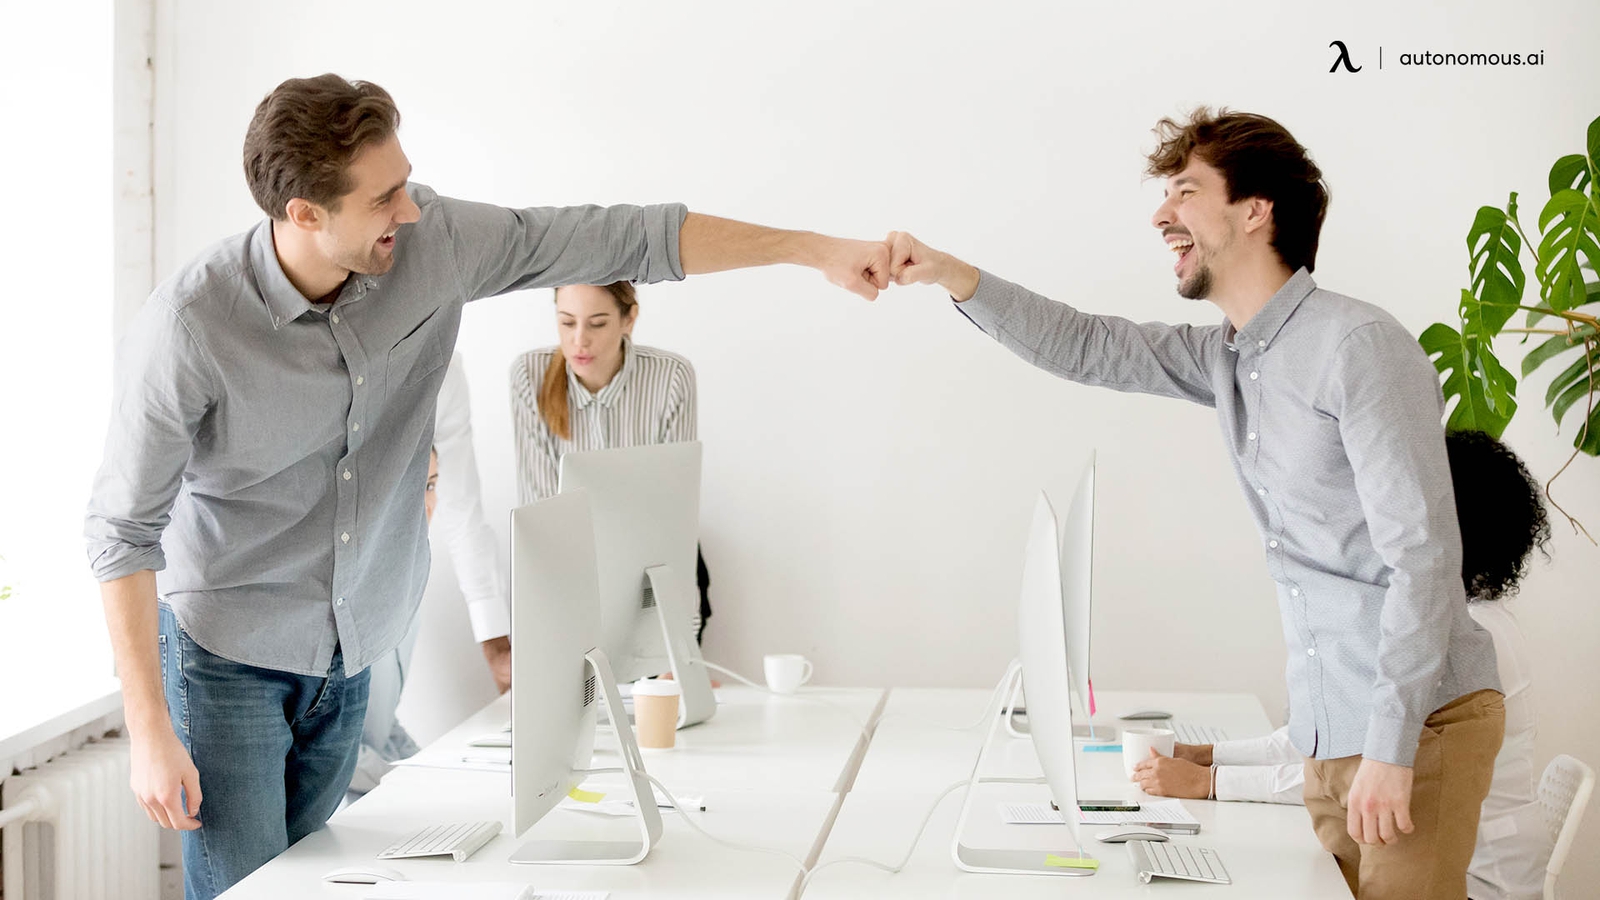 Some Strategies To Build Trust In The Workplace